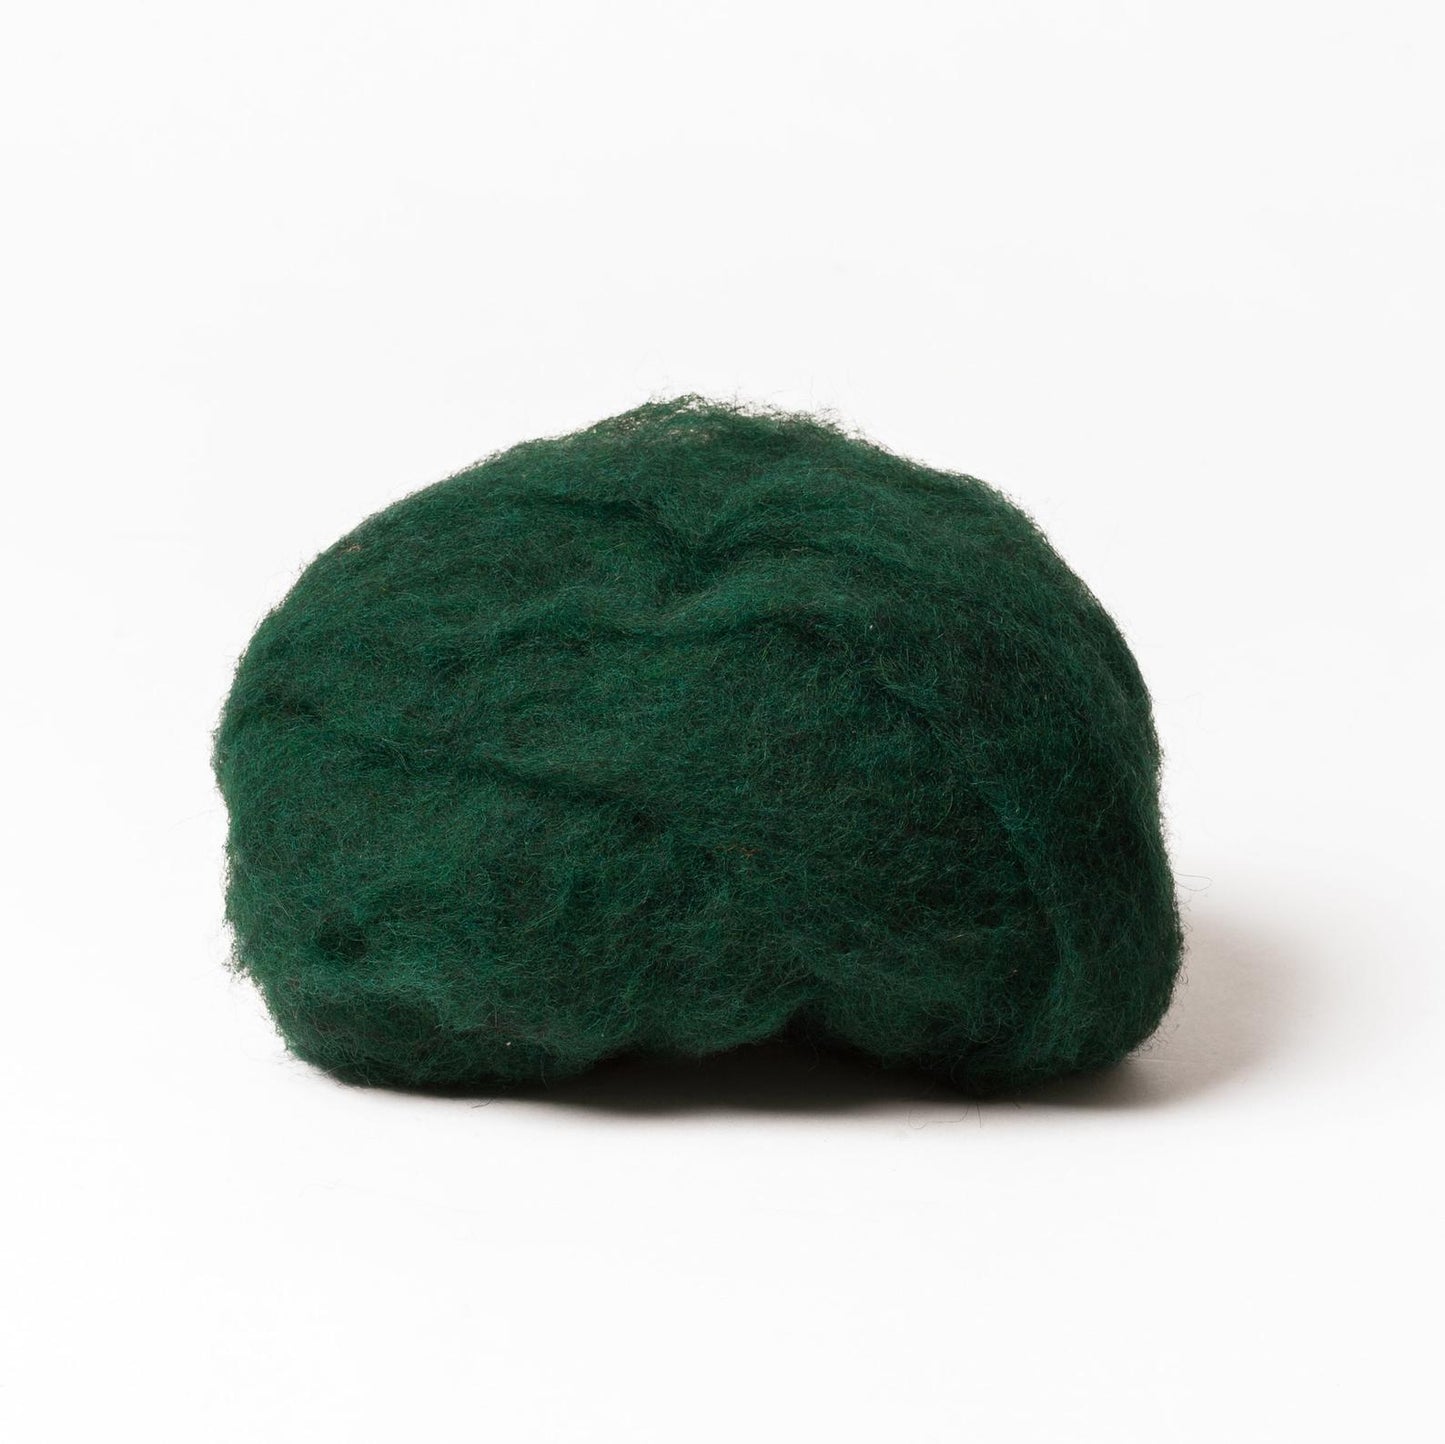 Dark Green Best Sheep Wool for Wet Felting From the tyrolean rock sheep